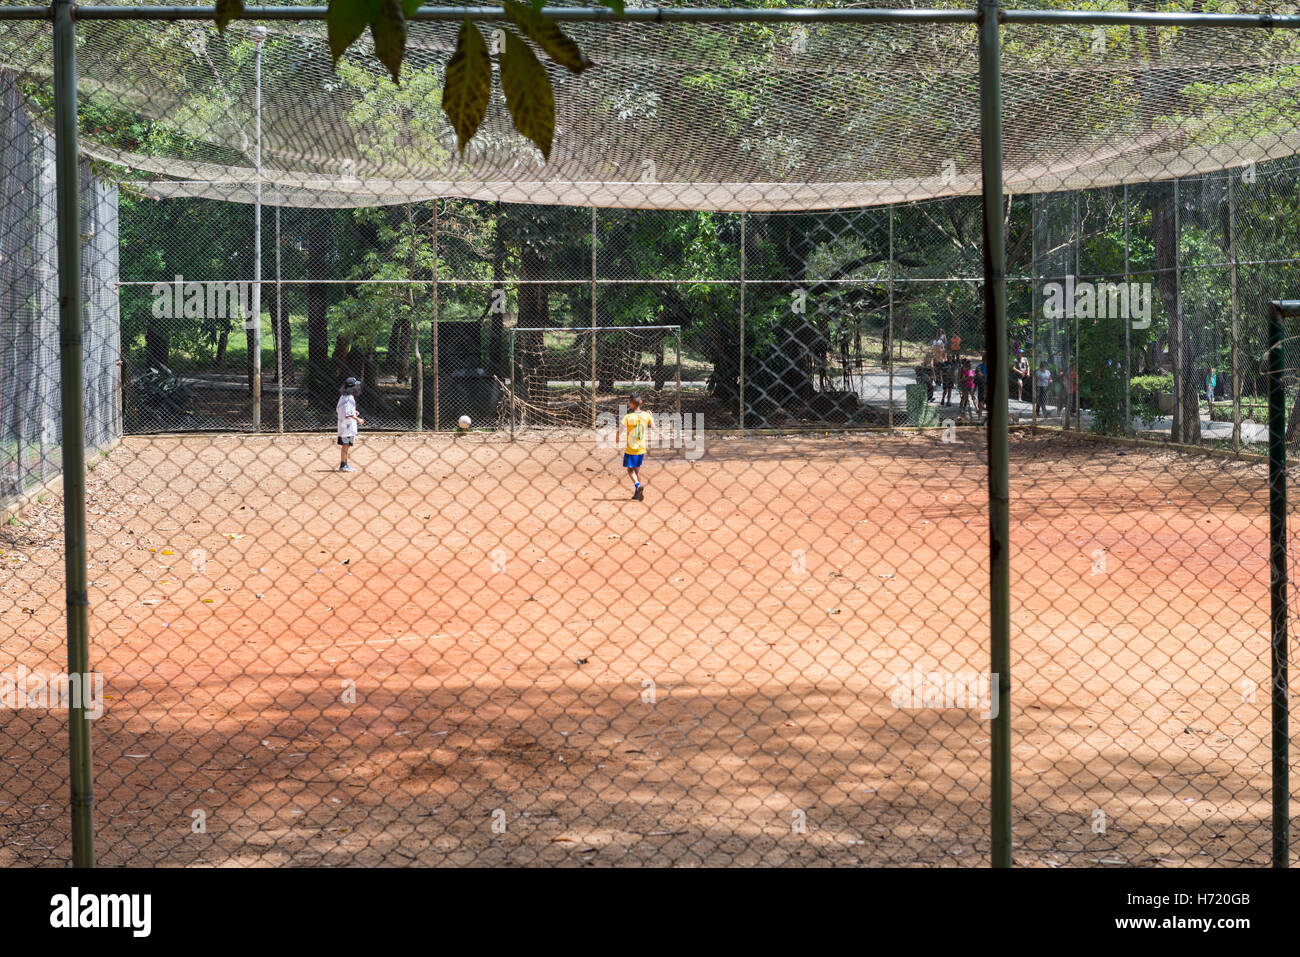 Sao Paulo, Brazil - October 15 2016: Kids playing football at the Aclimacao Park in Sao Paulo, Brazil. Photo series (8 of 8) Stock Photo